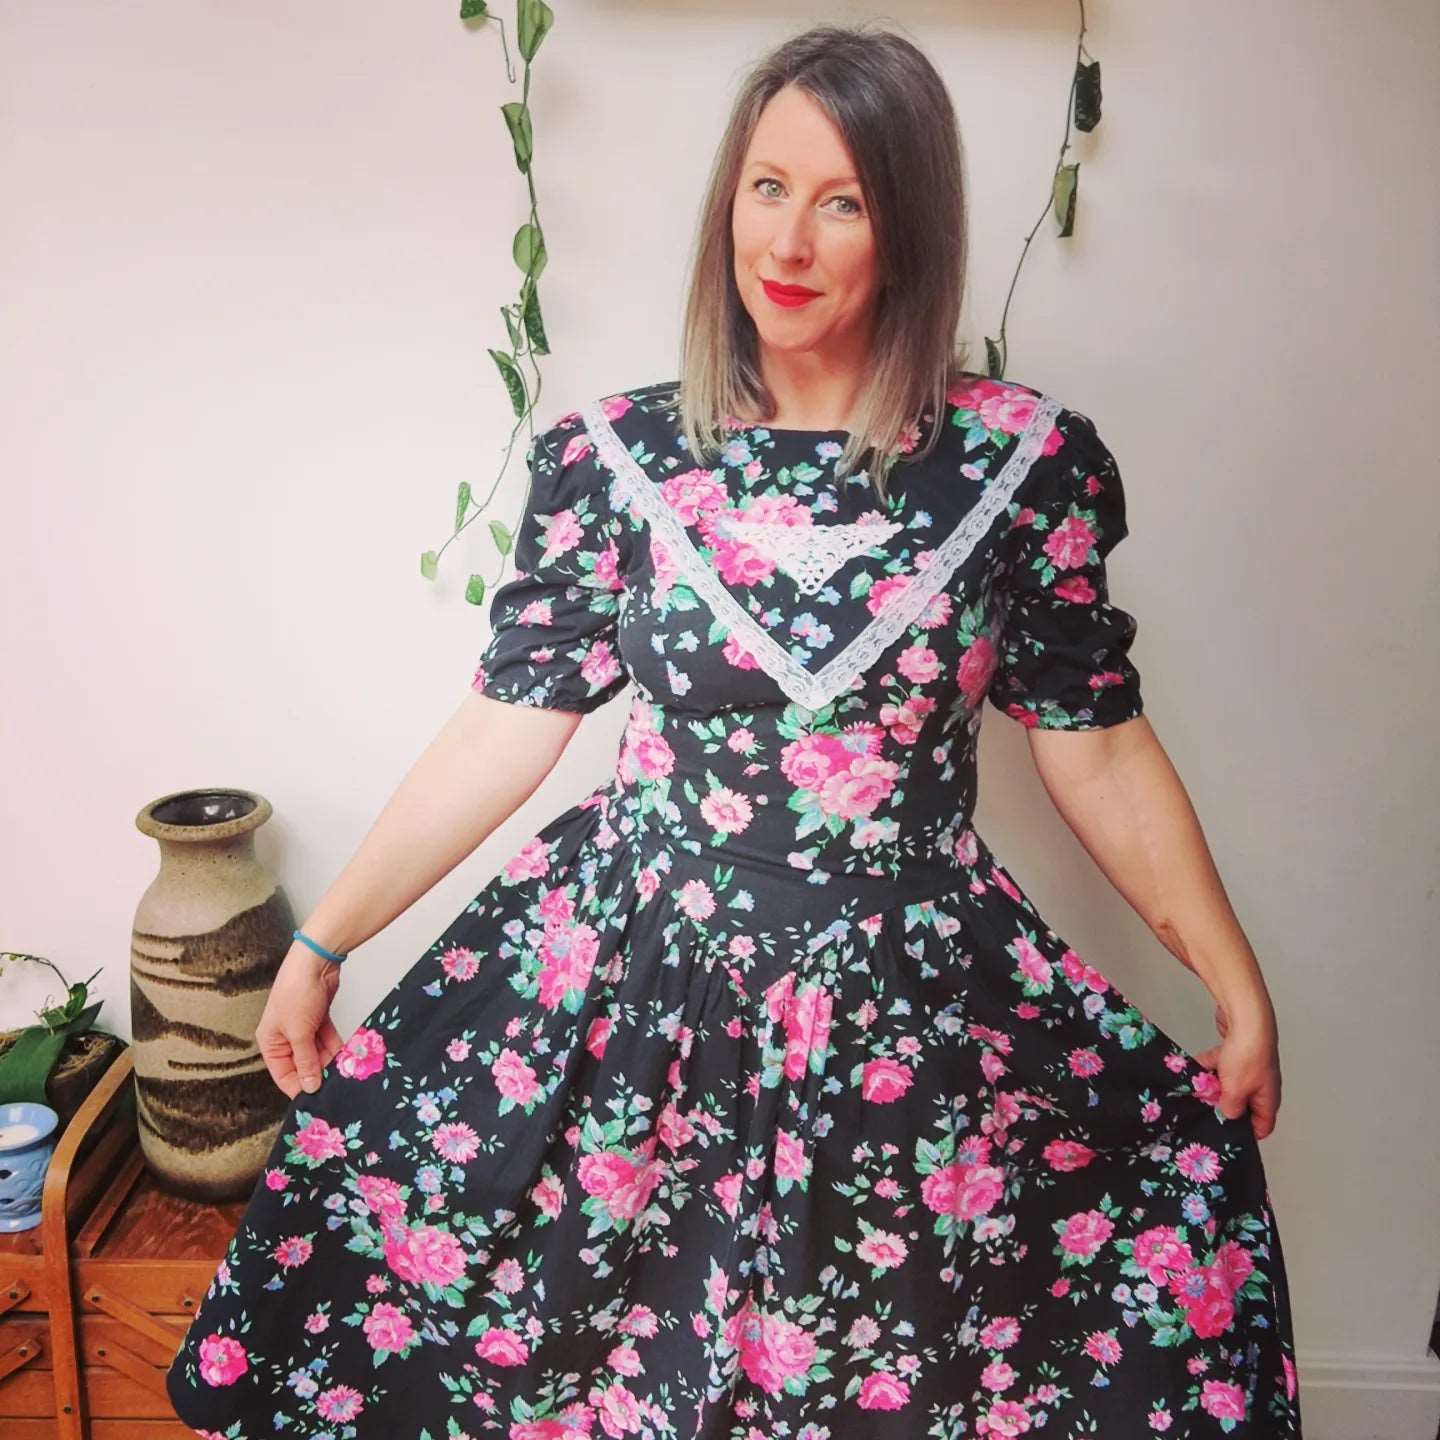 Black floral Laura Ashley style 80s midi dress with lace collar. Size 14